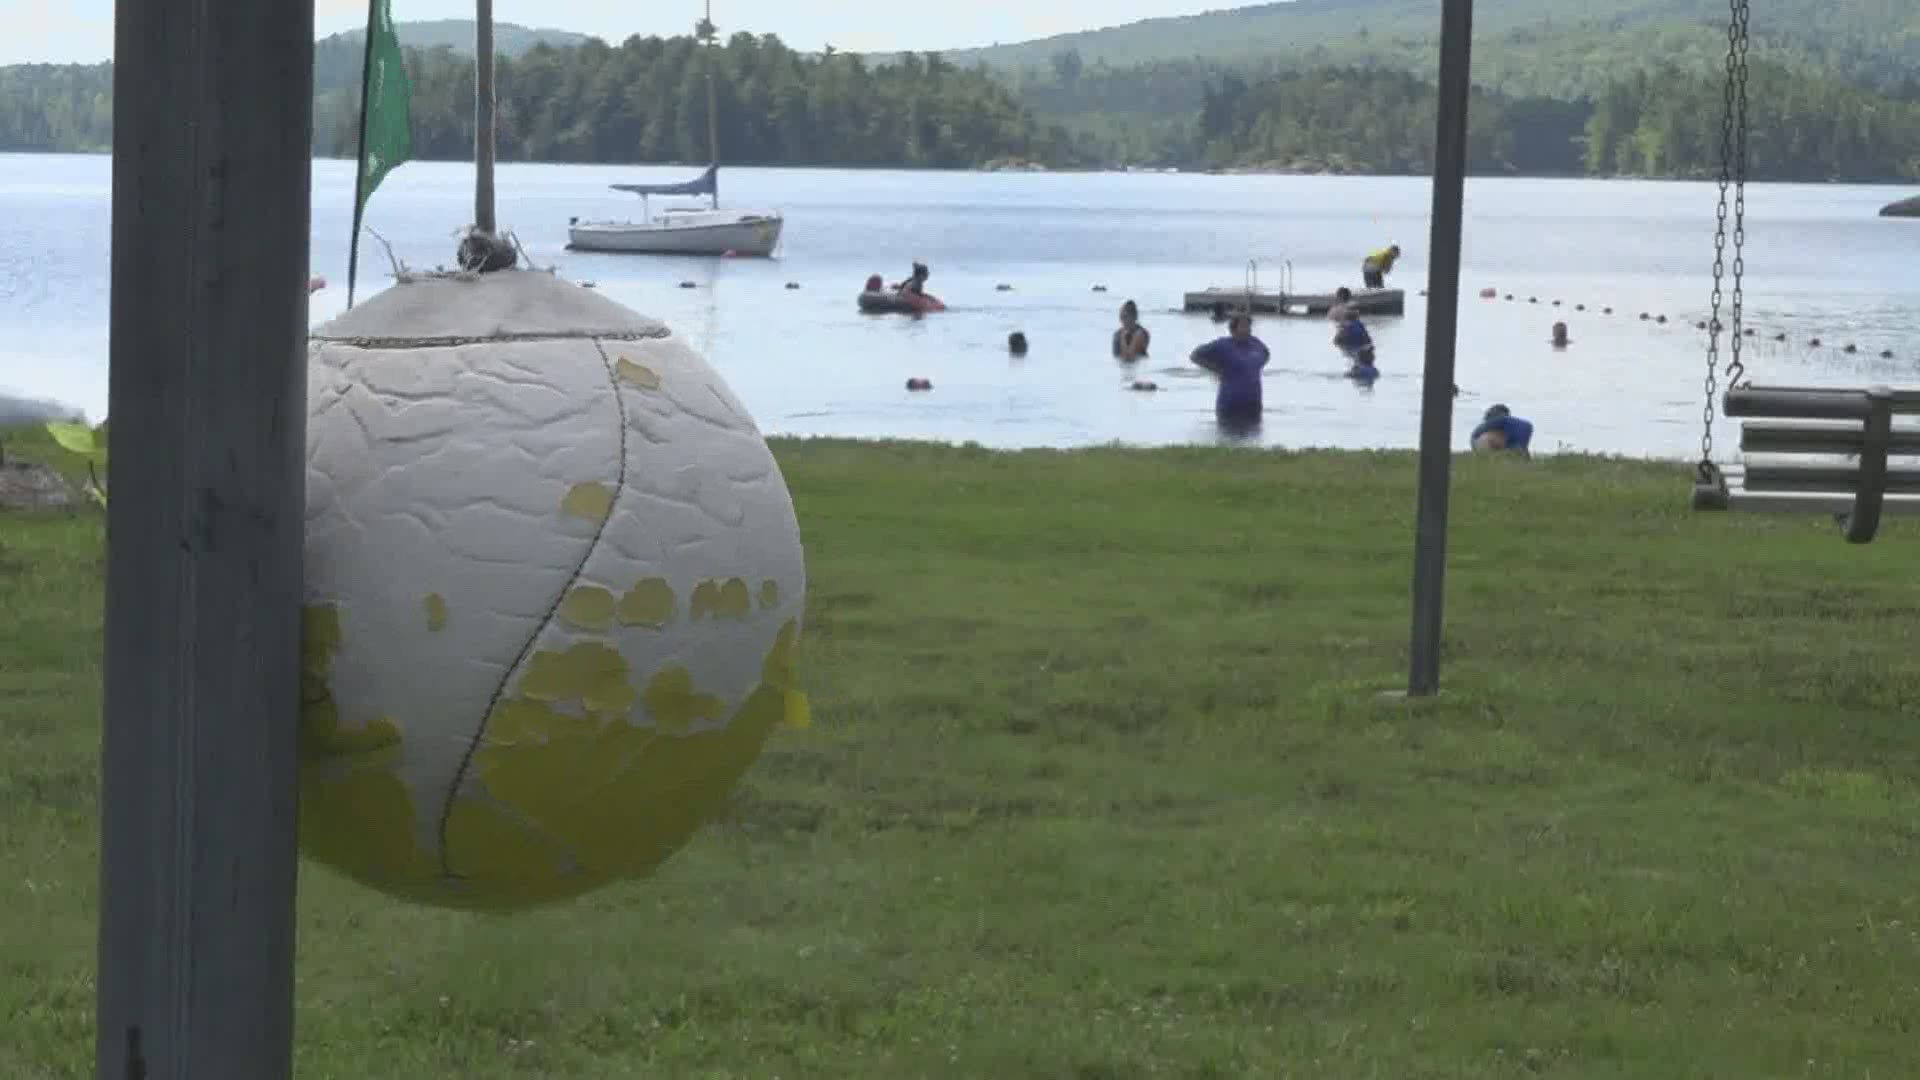 Many summer camps were canceled due to COVID-19, including Camp Capella.